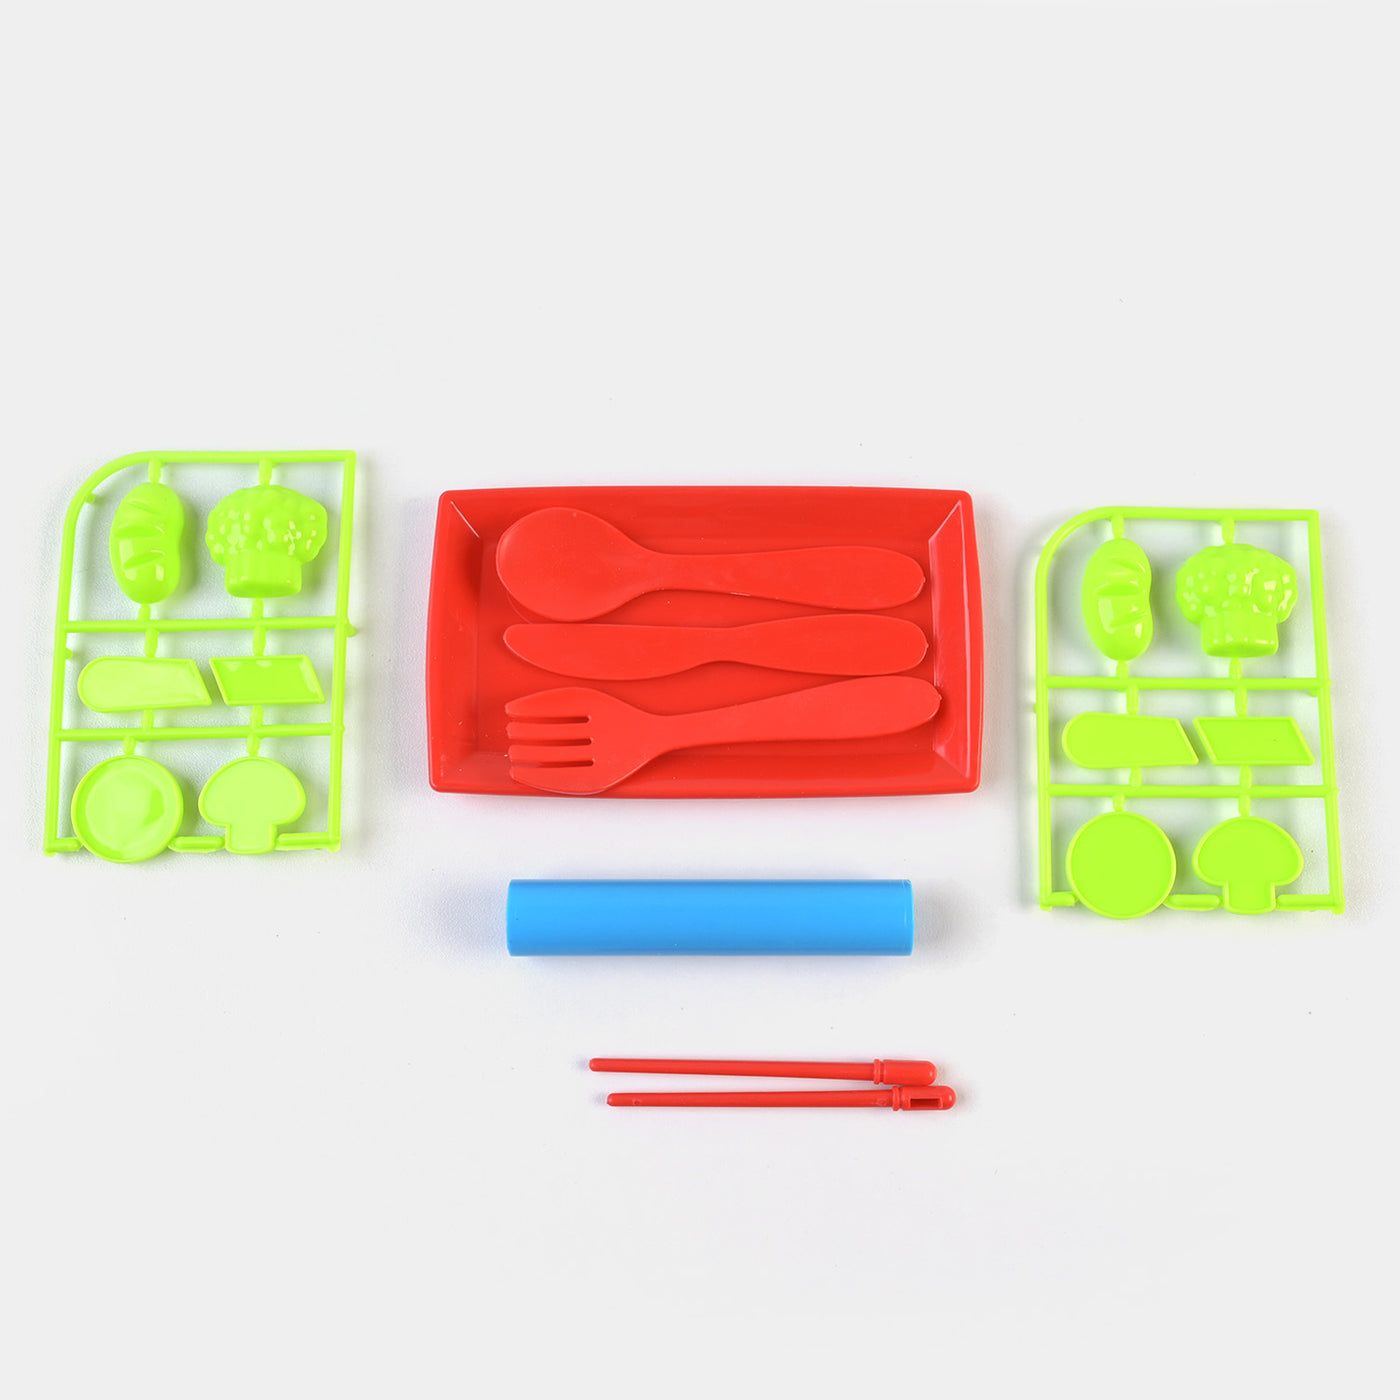 Colored Play Dough Set For kids